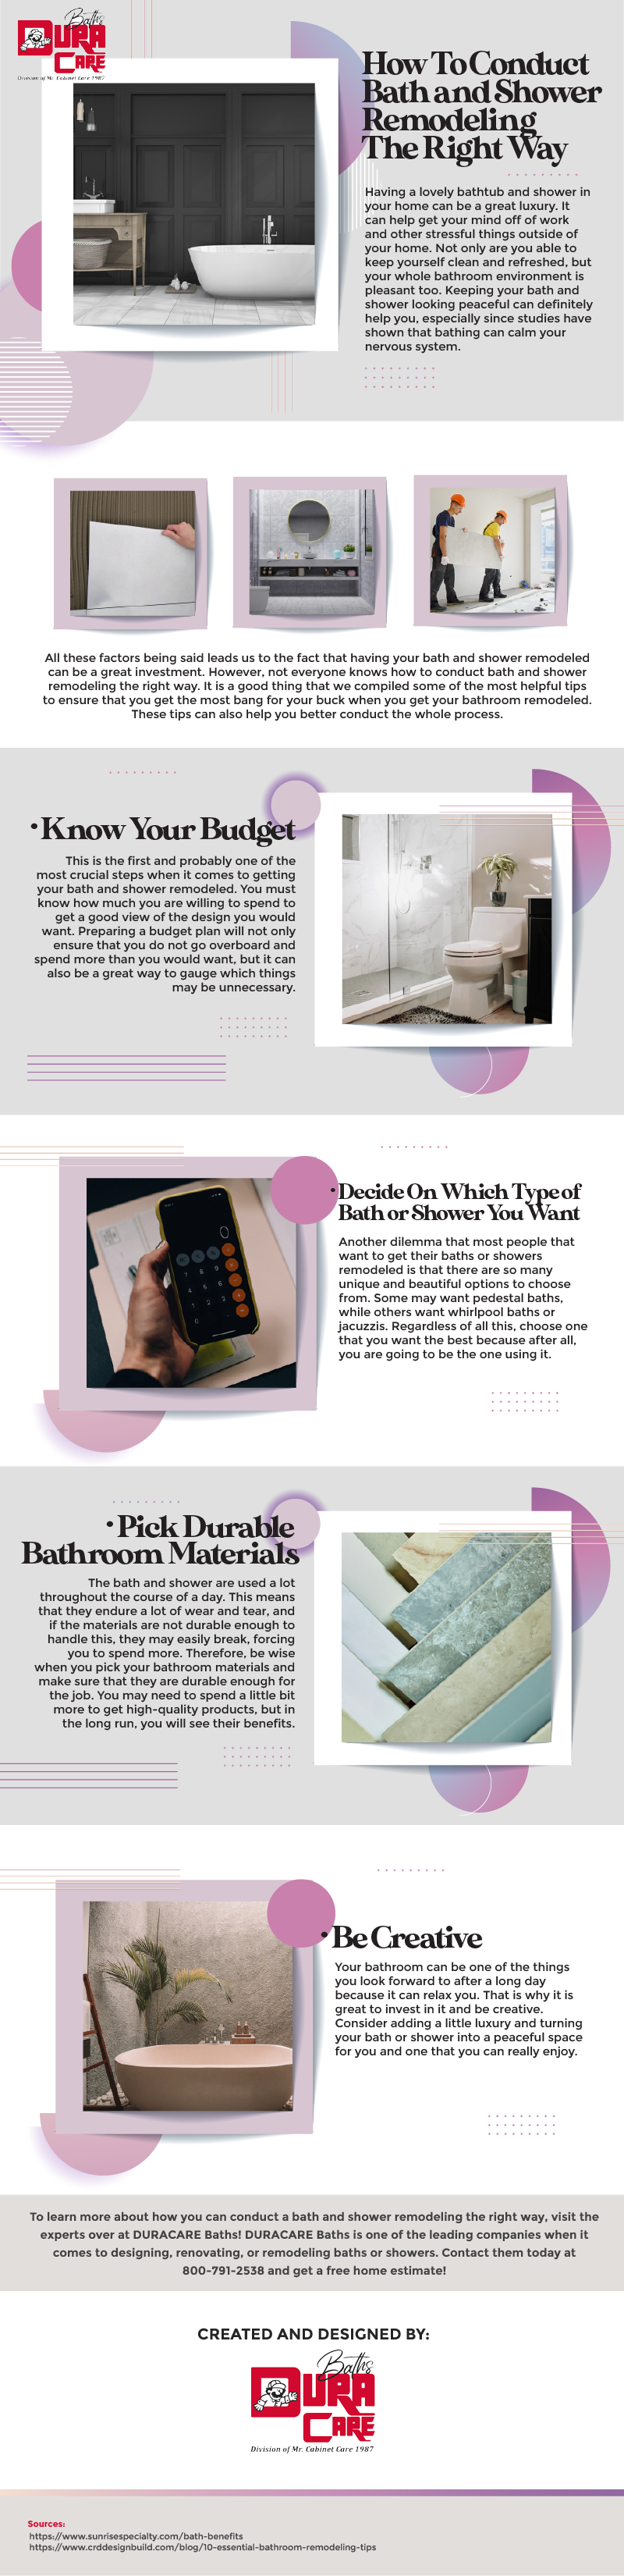 How To Conduct Bath and Shower Remodeling The Right Way Infographic